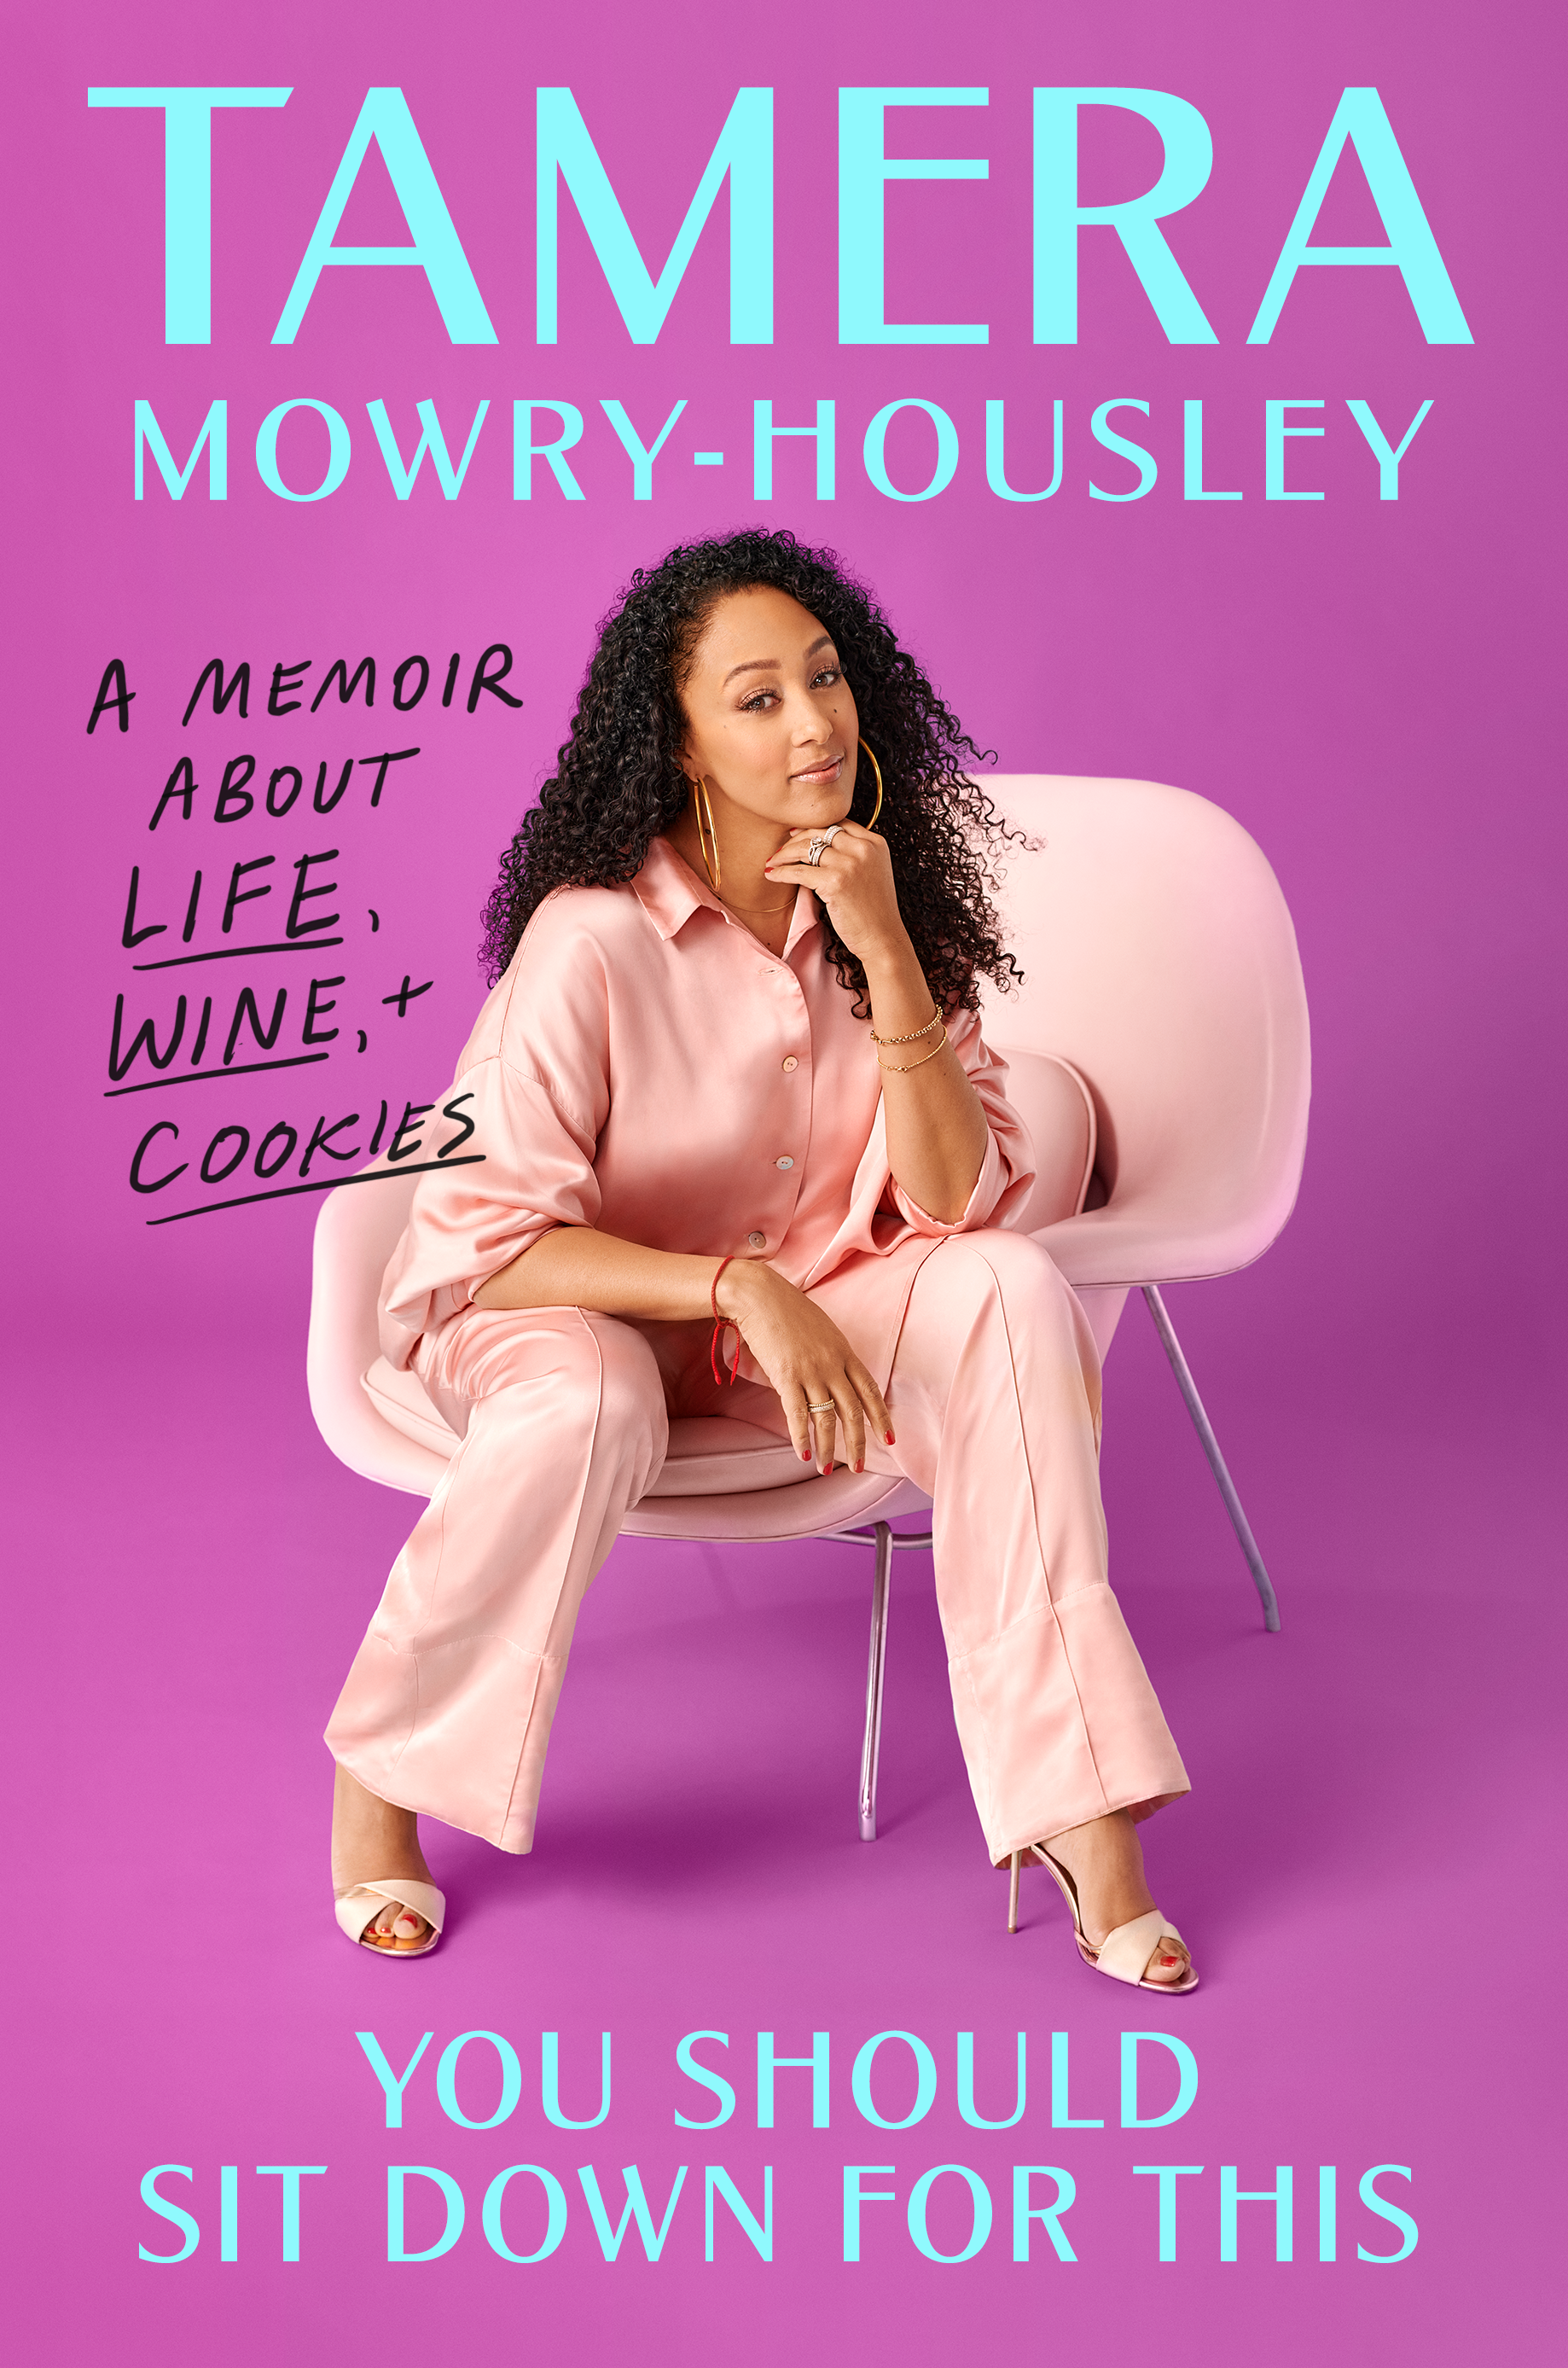 Tamera Mowry-Housley’s Memoir Follows Her Journey to Finding “Hope on the Other Side”